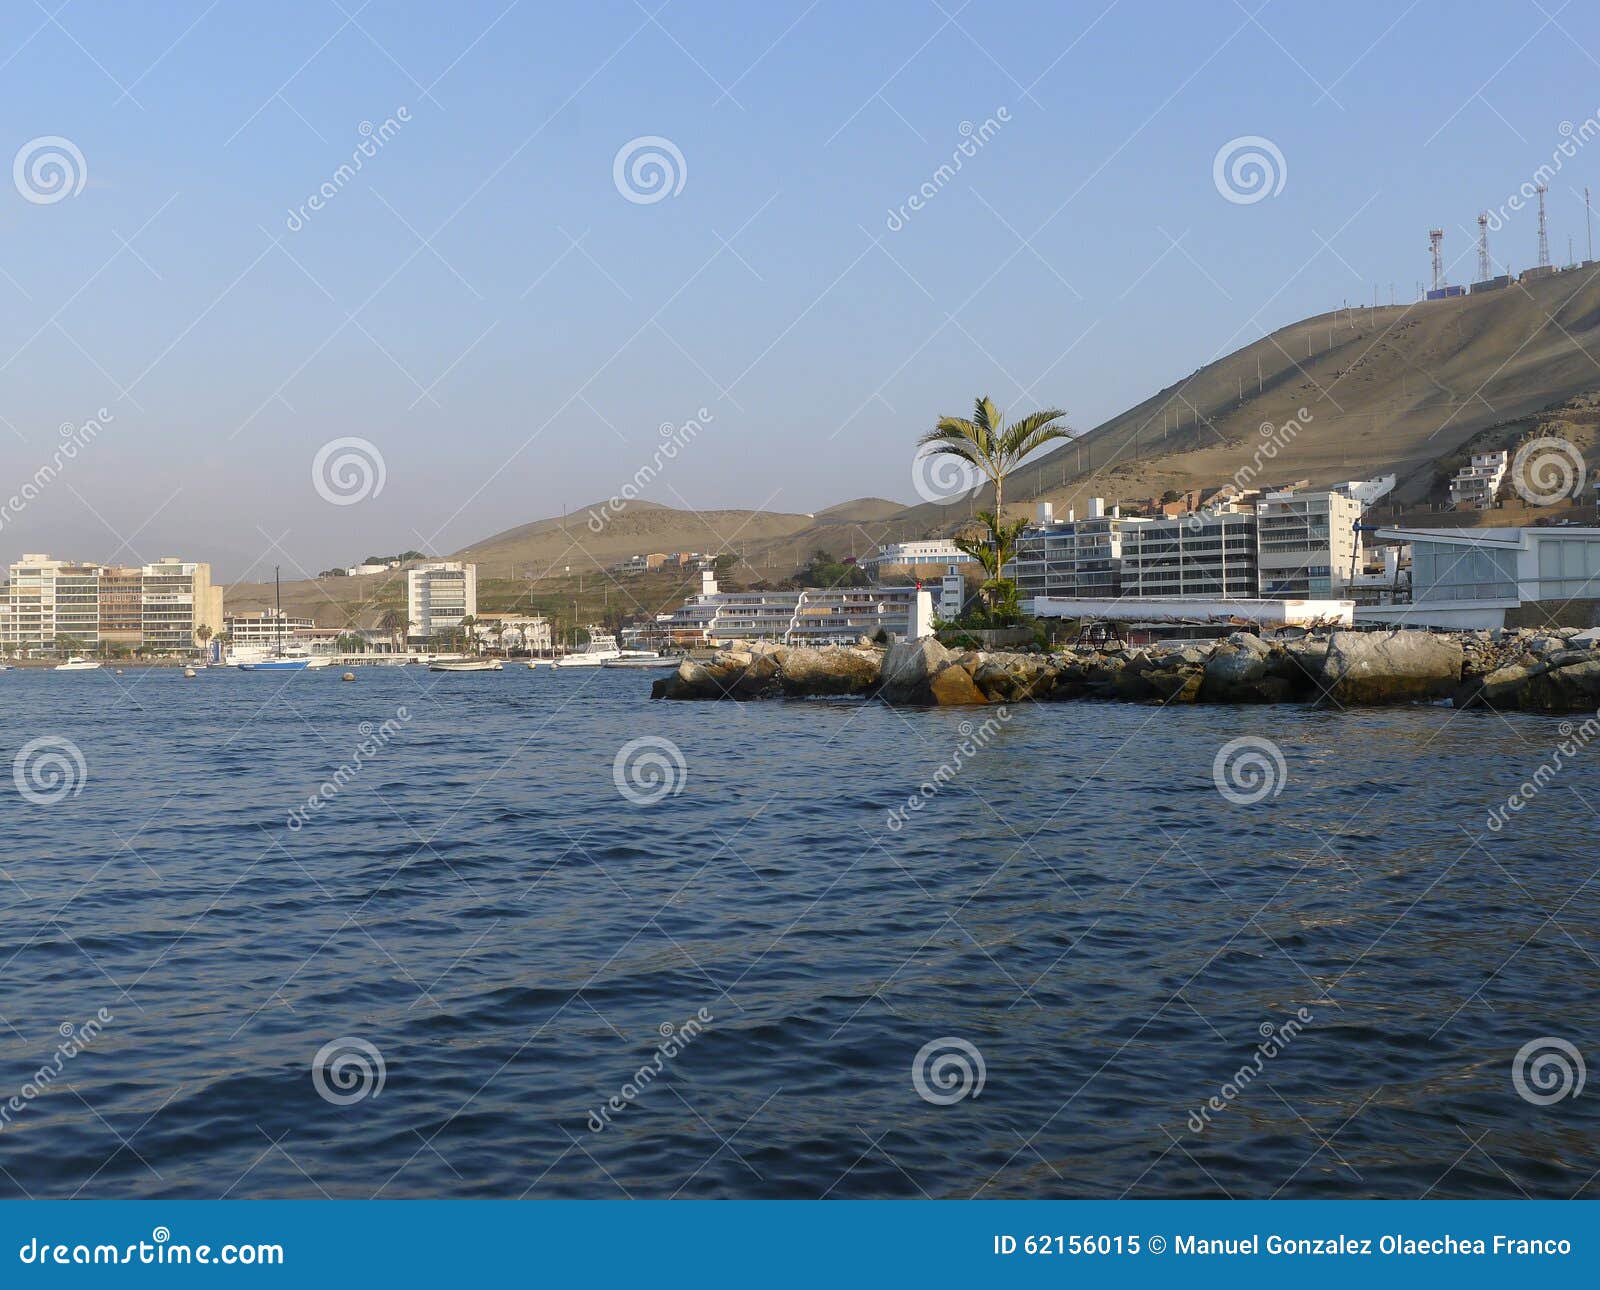 ancon view from the sea